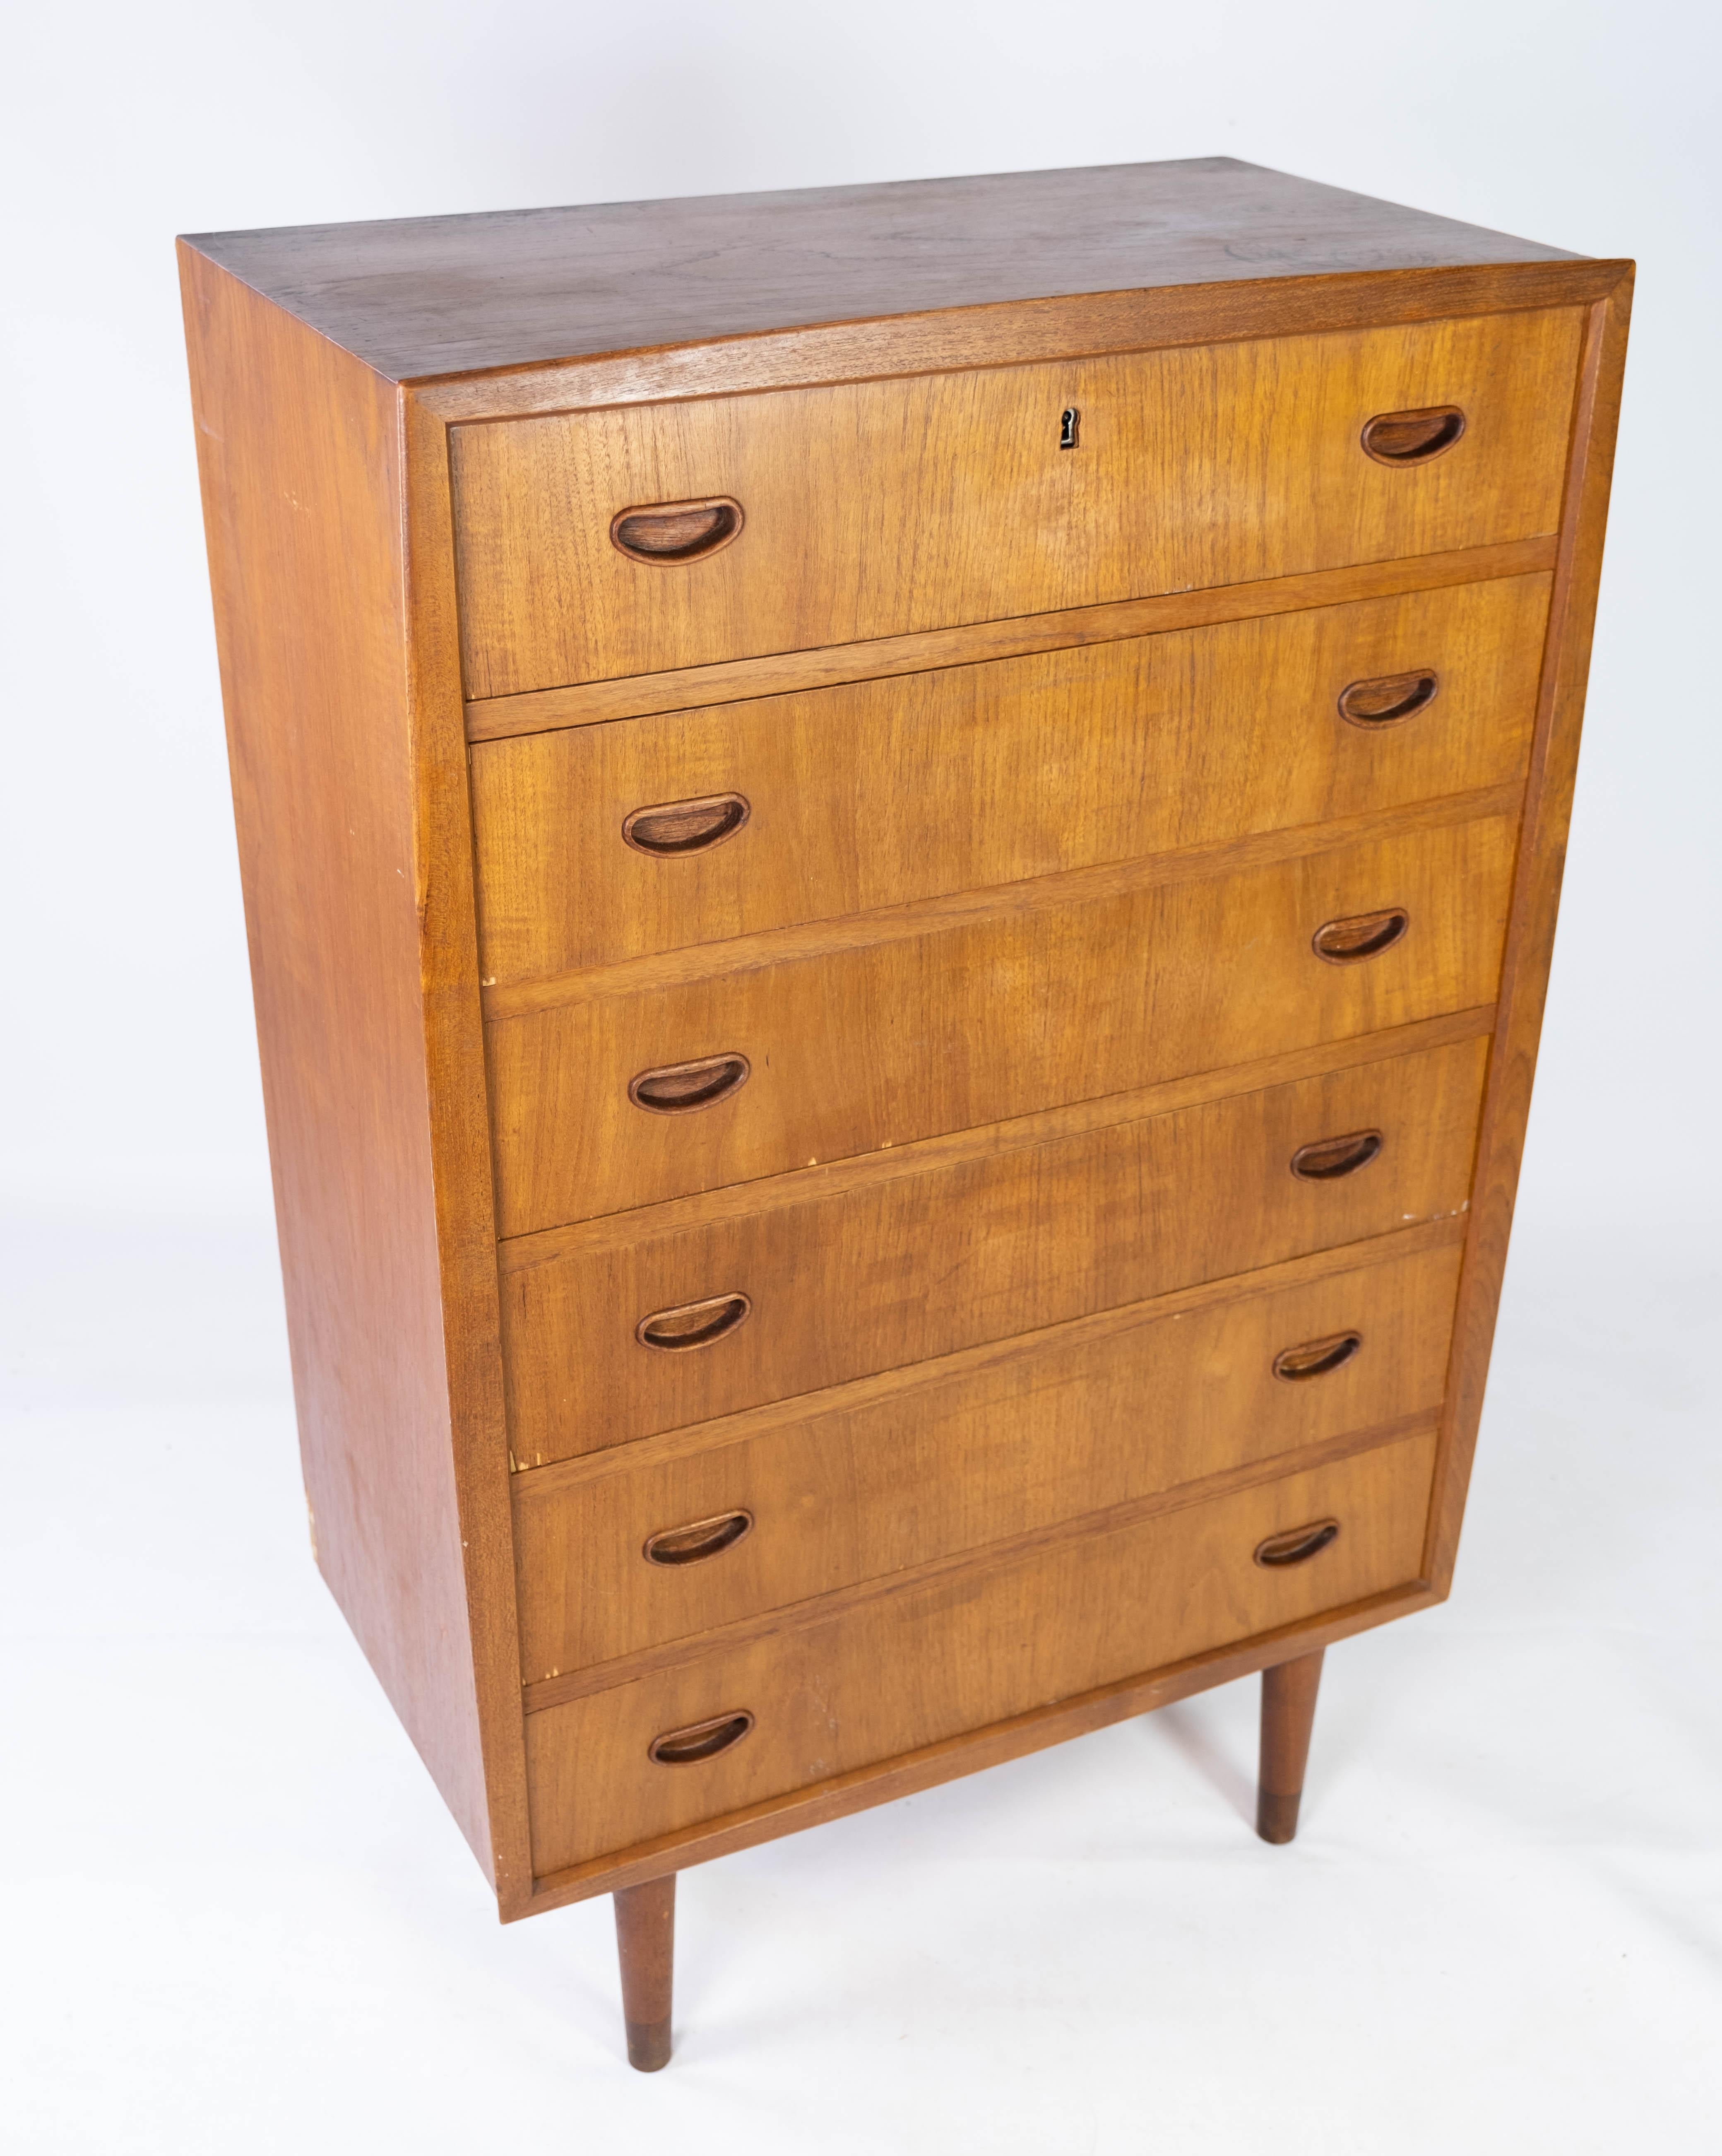 
This chest of drawers from the 1960s exemplifies the timeless allure of Danish design. Crafted from teak wood, it showcases the iconic blend of sleek lines, organic textures, and functional elegance that characterizes Scandinavian modern